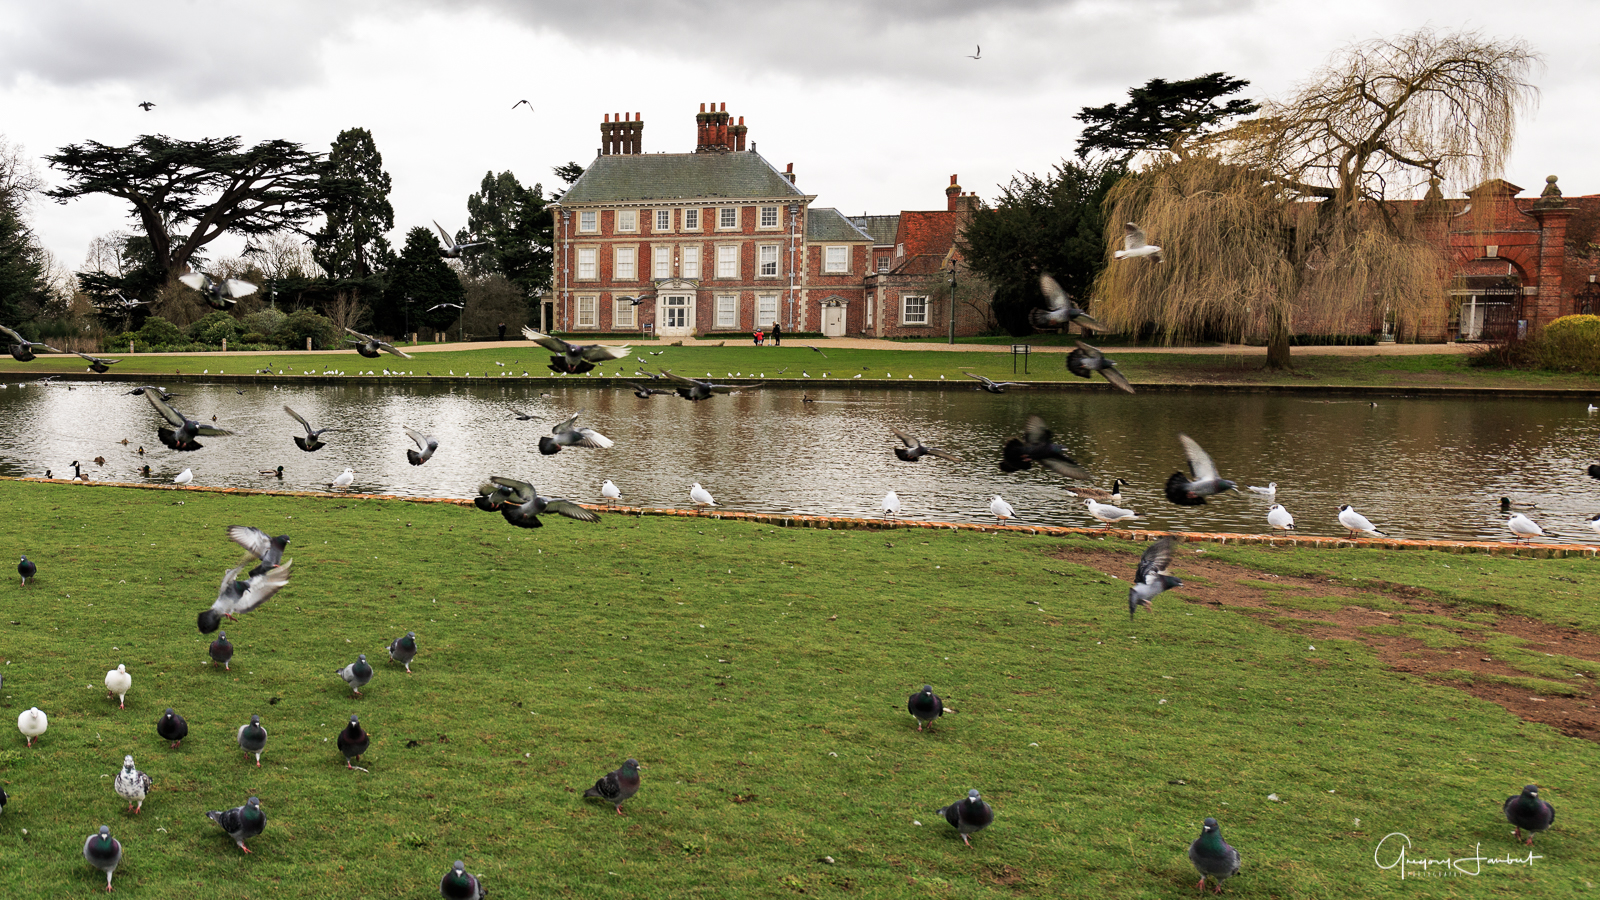 20170301_Enfield_Forty-Hall_The-Birds-Pond